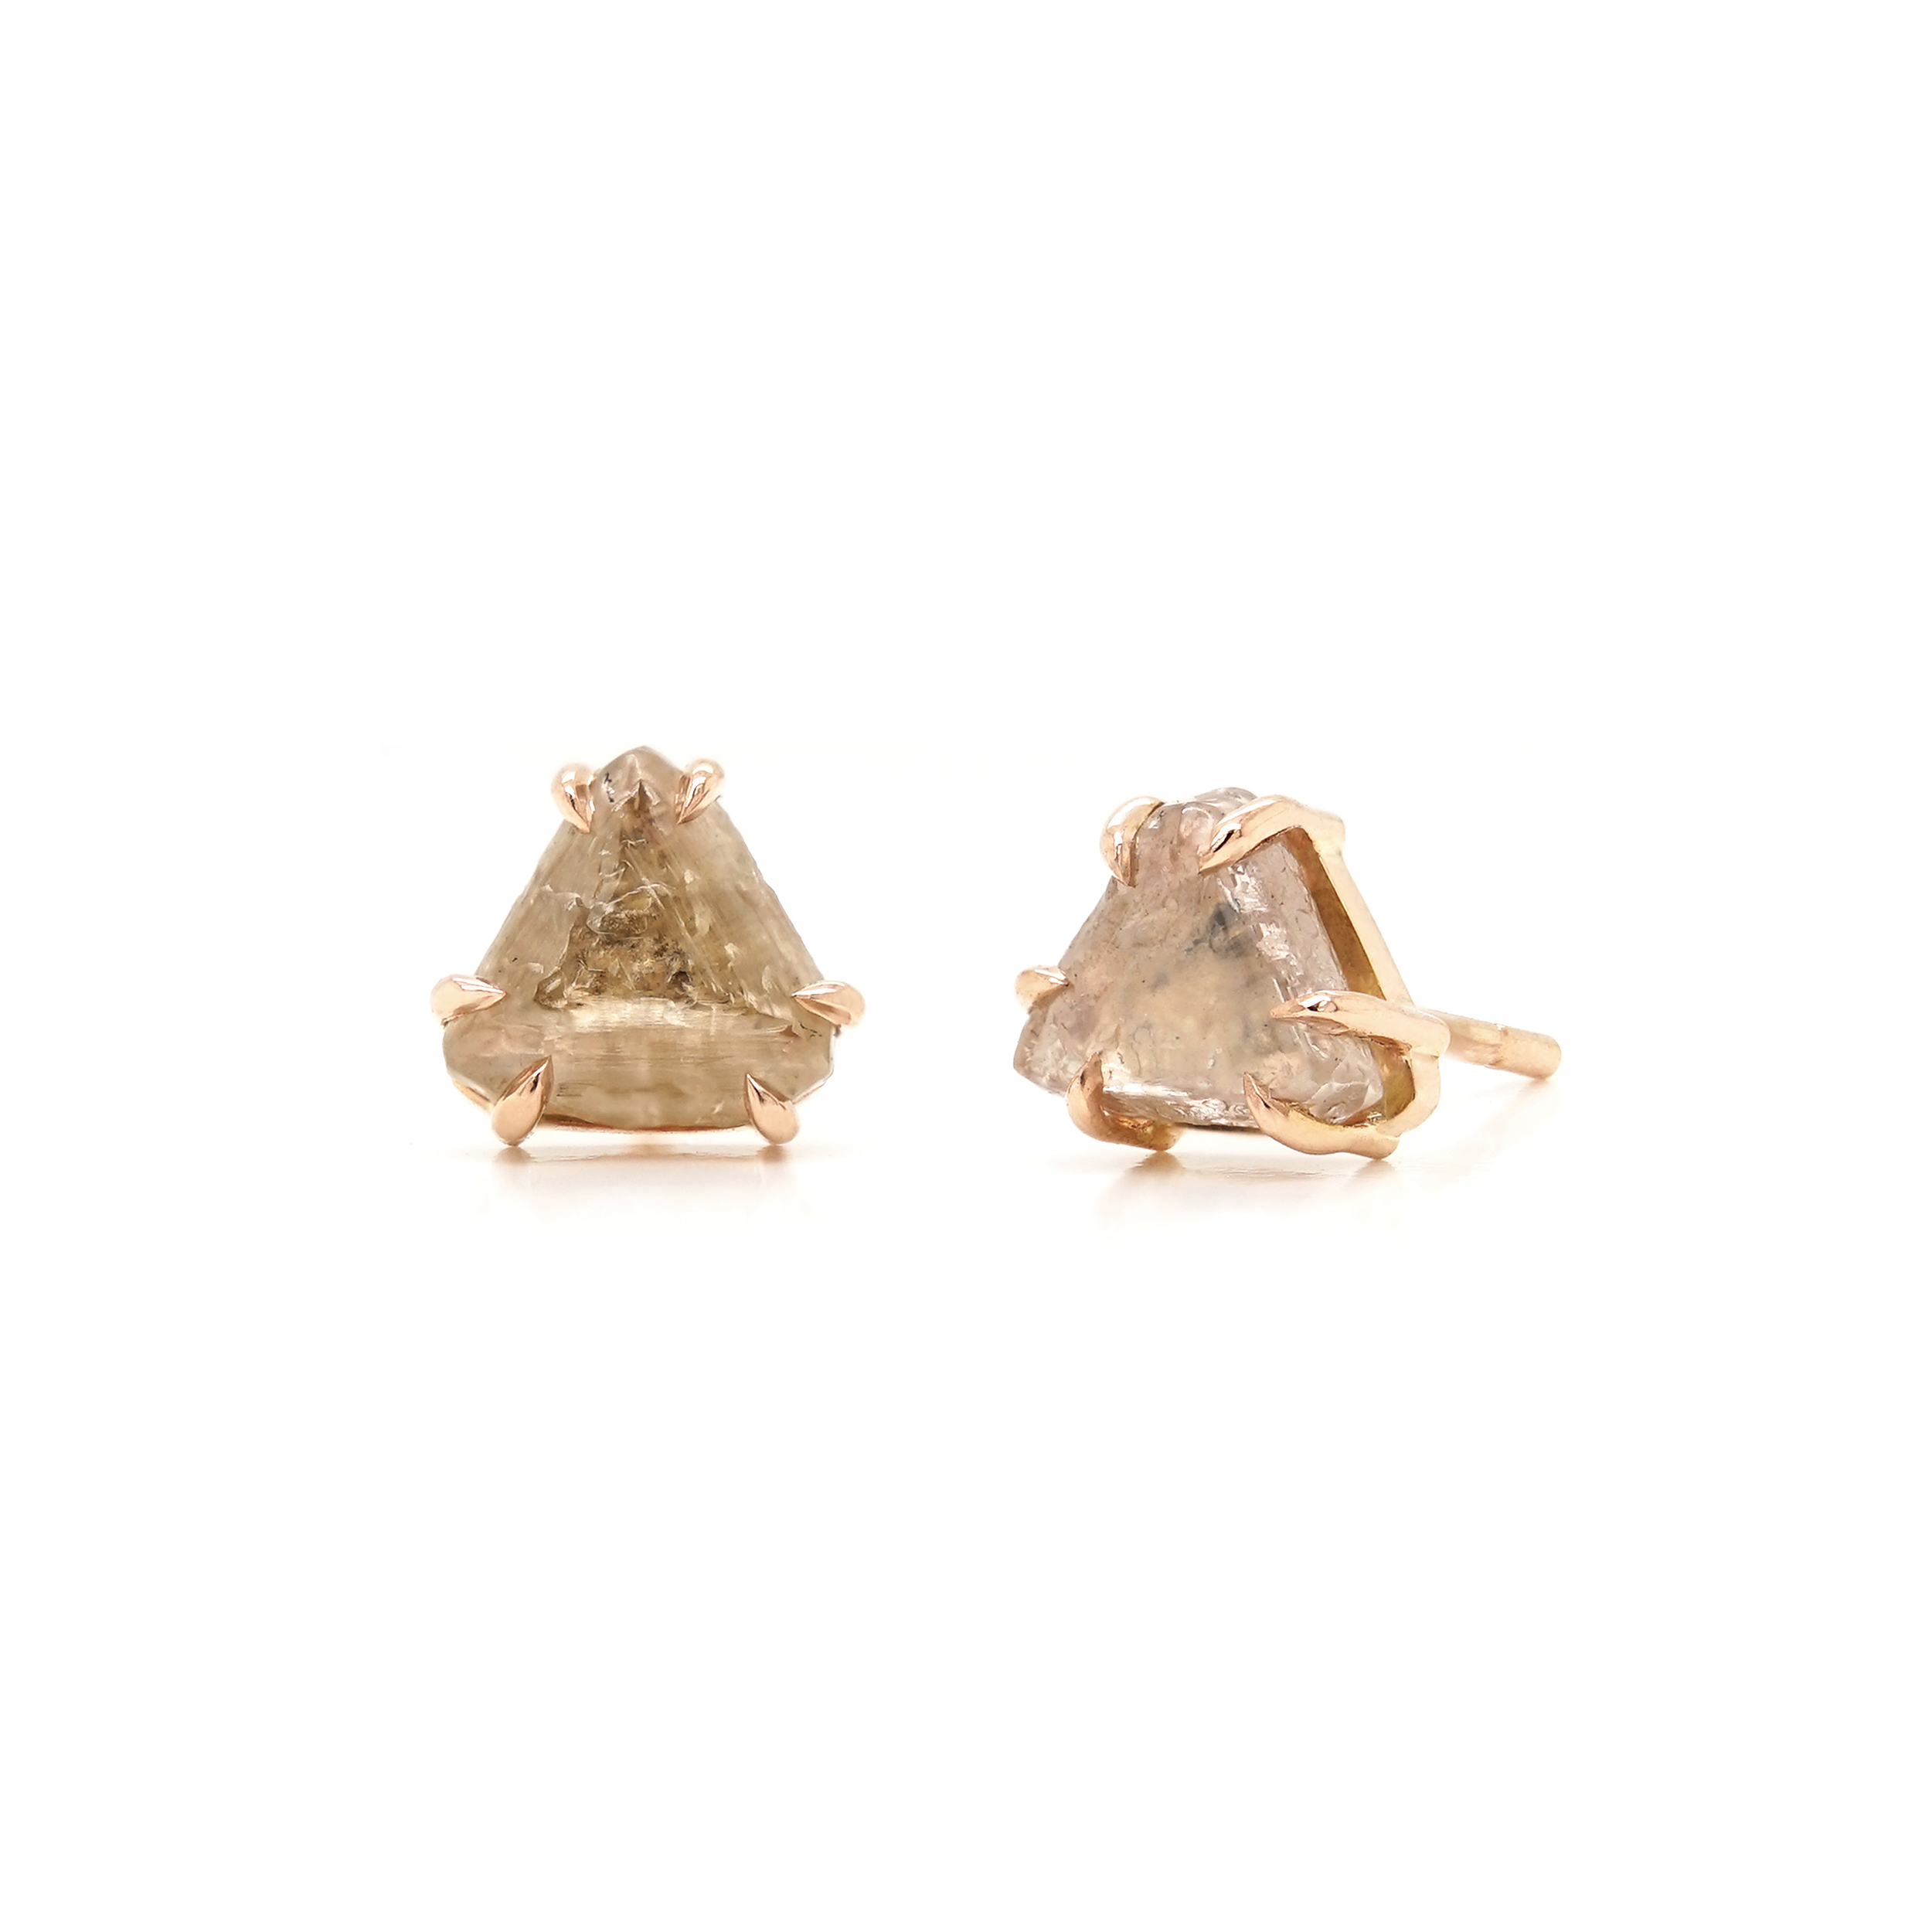 A pair of rose gold stud earrings featuring 2 triangle shaped rough champagne diamonds, each set in 6 griffin claws.